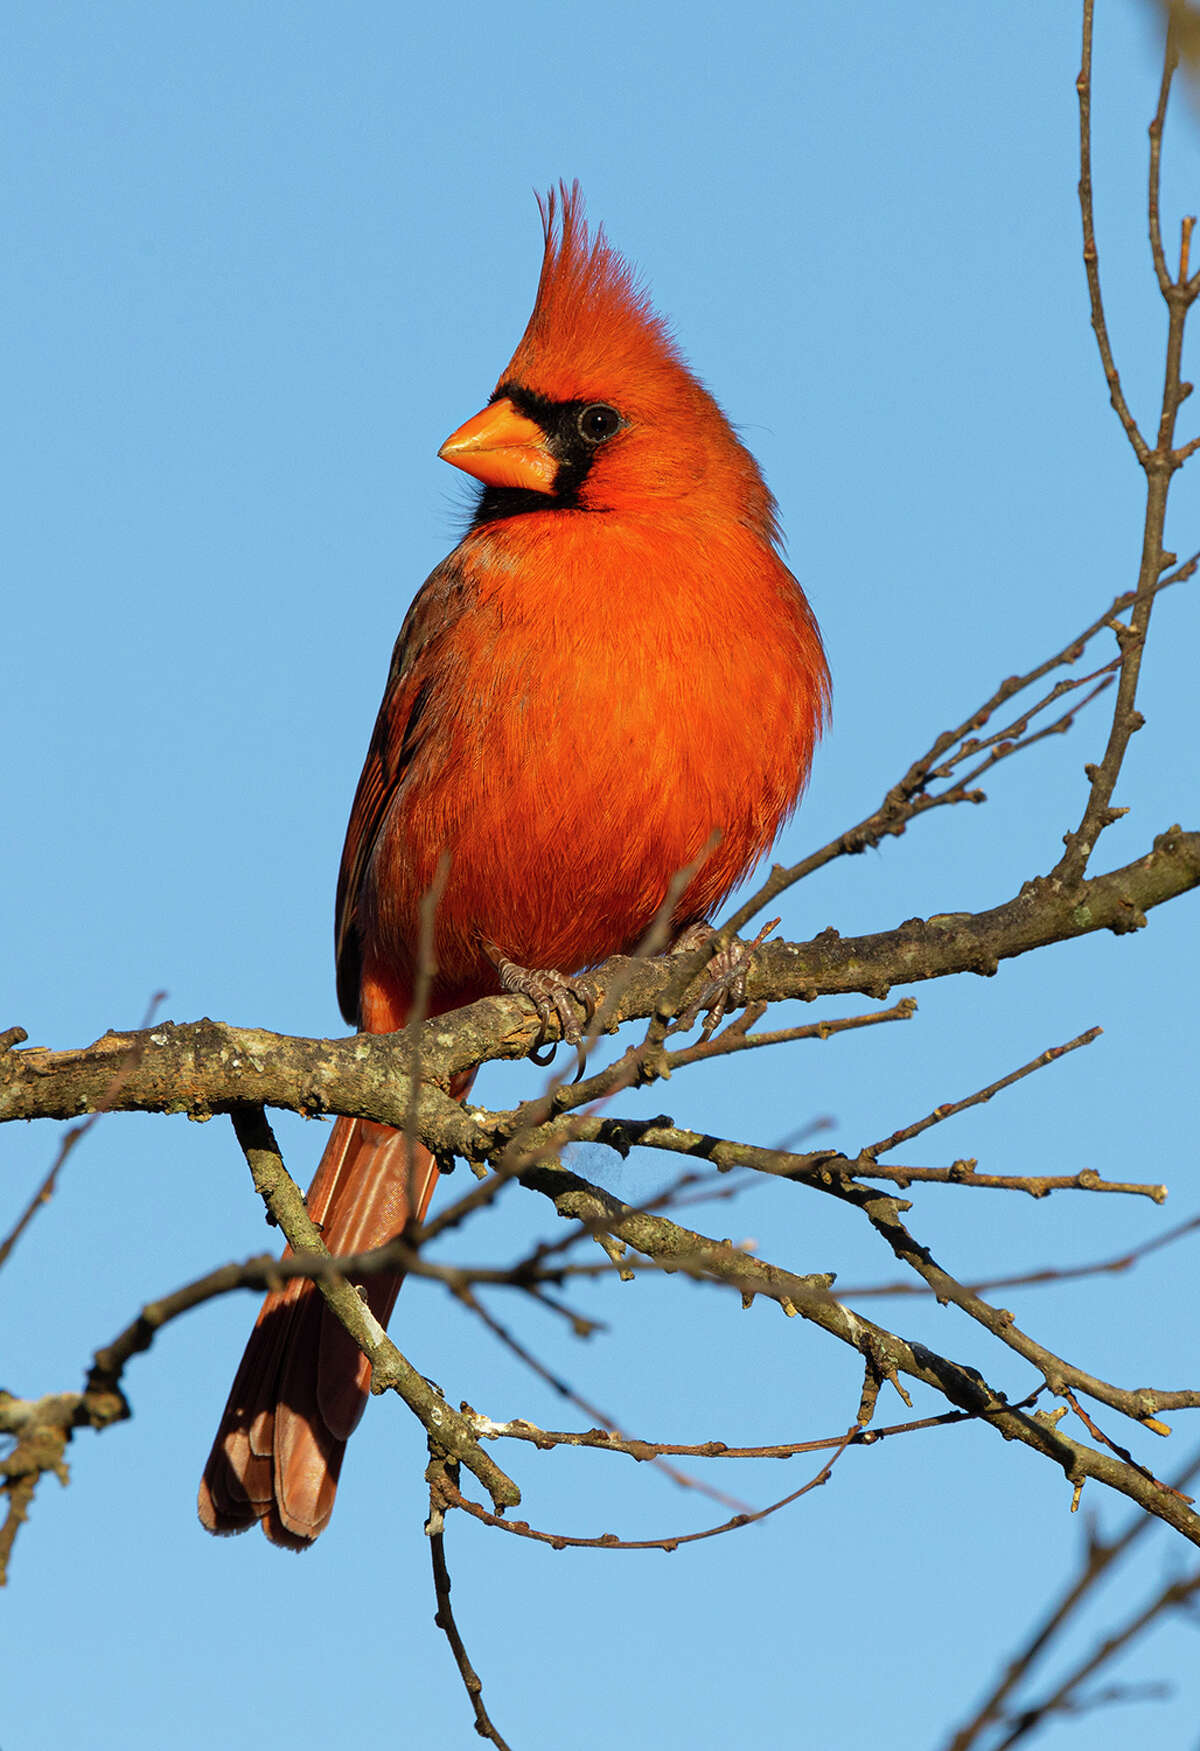 Male northern cardinals are frequently seen on Valentine's Day cards as a symbol of love and romance. Photo Credit: Kathy Adams Clark. Restricted use.